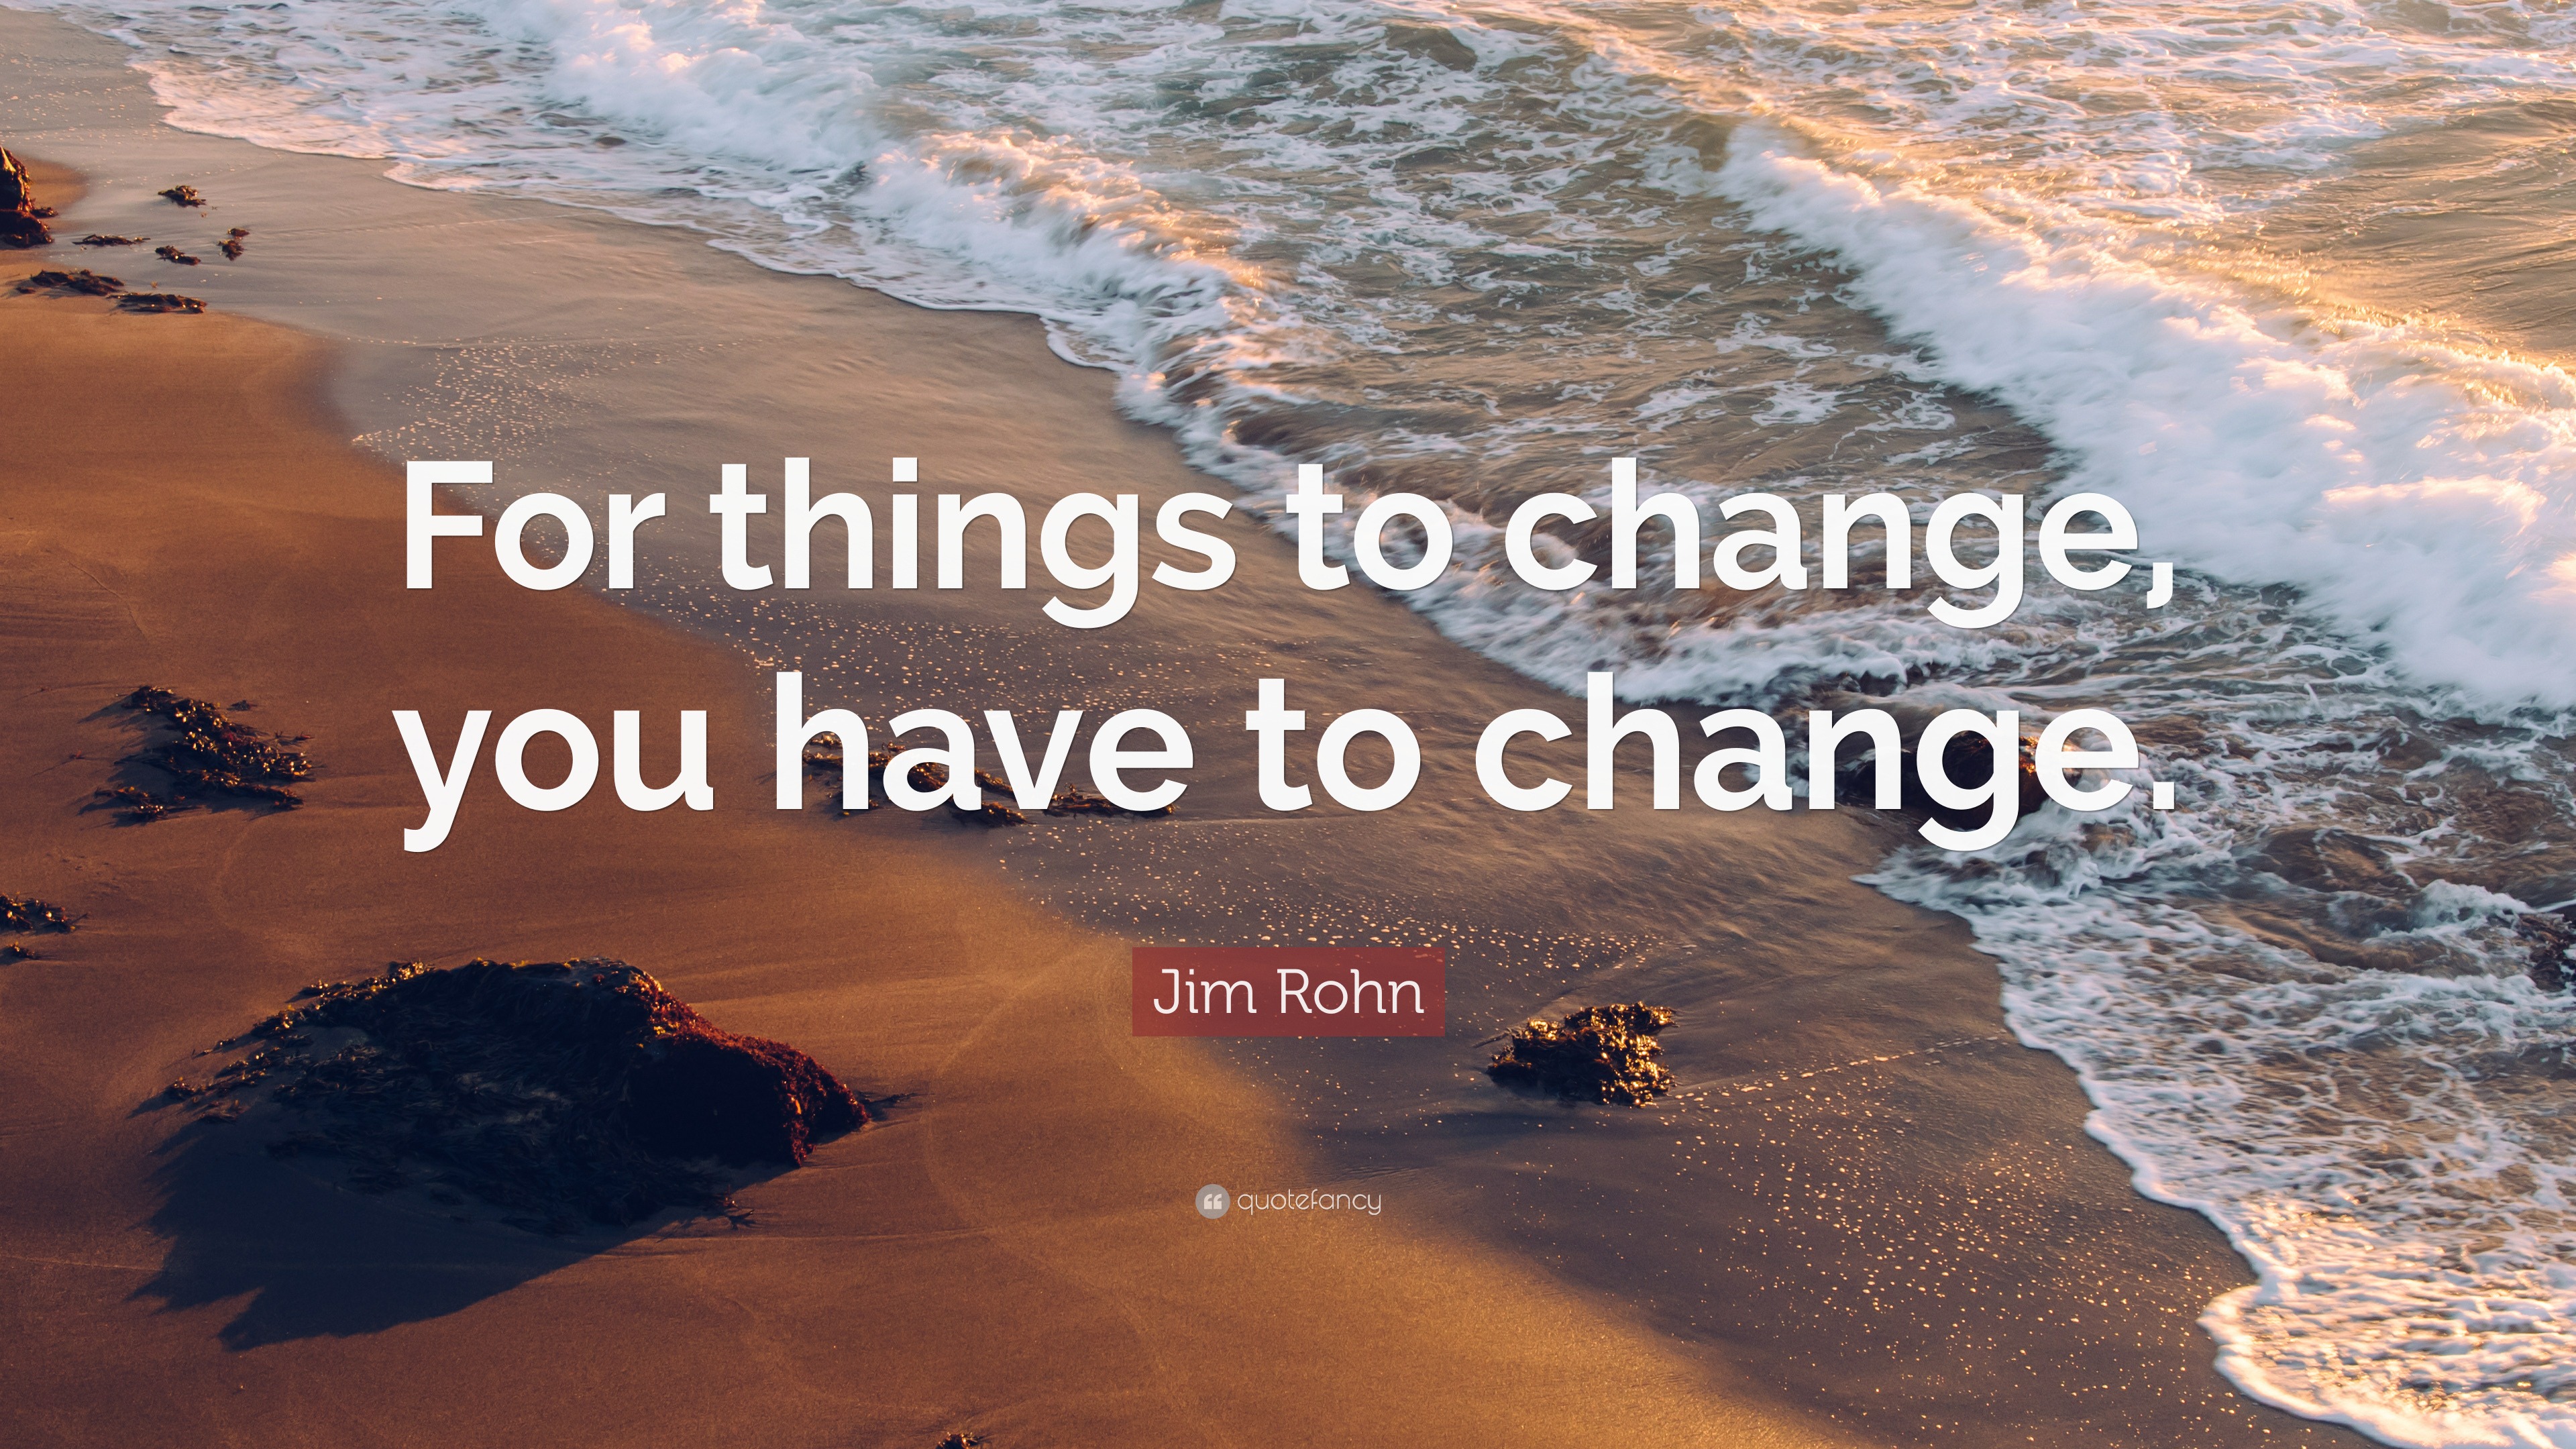 Jim Rohn Quote: “For things to change, you have to change.”